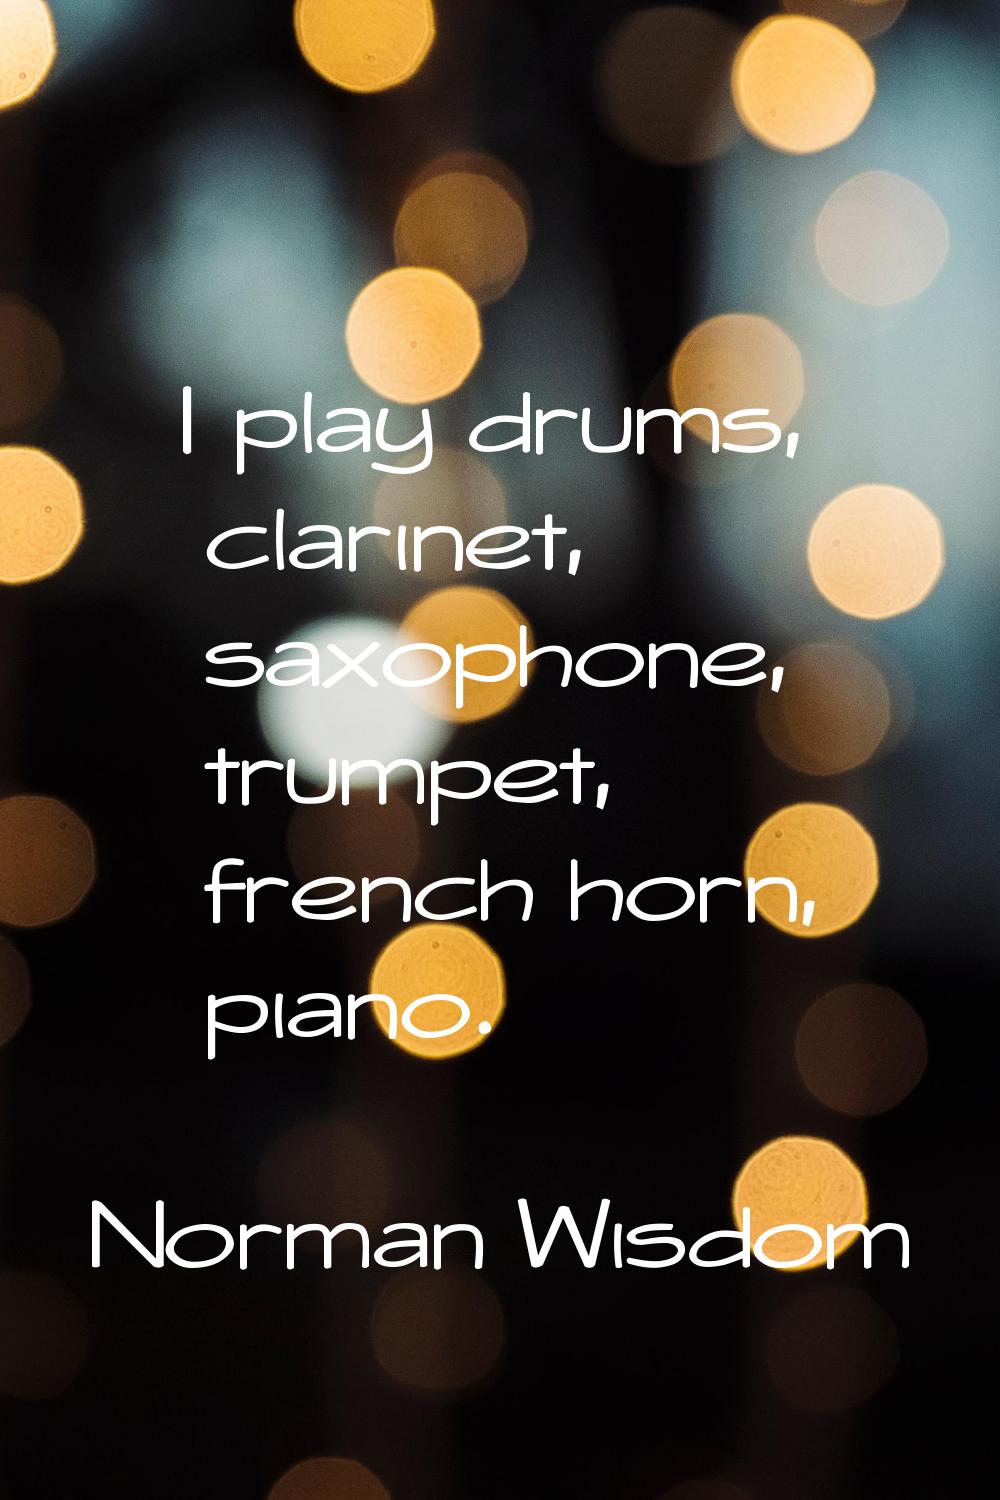 I play drums, clarinet, saxophone, trumpet, french horn, piano.